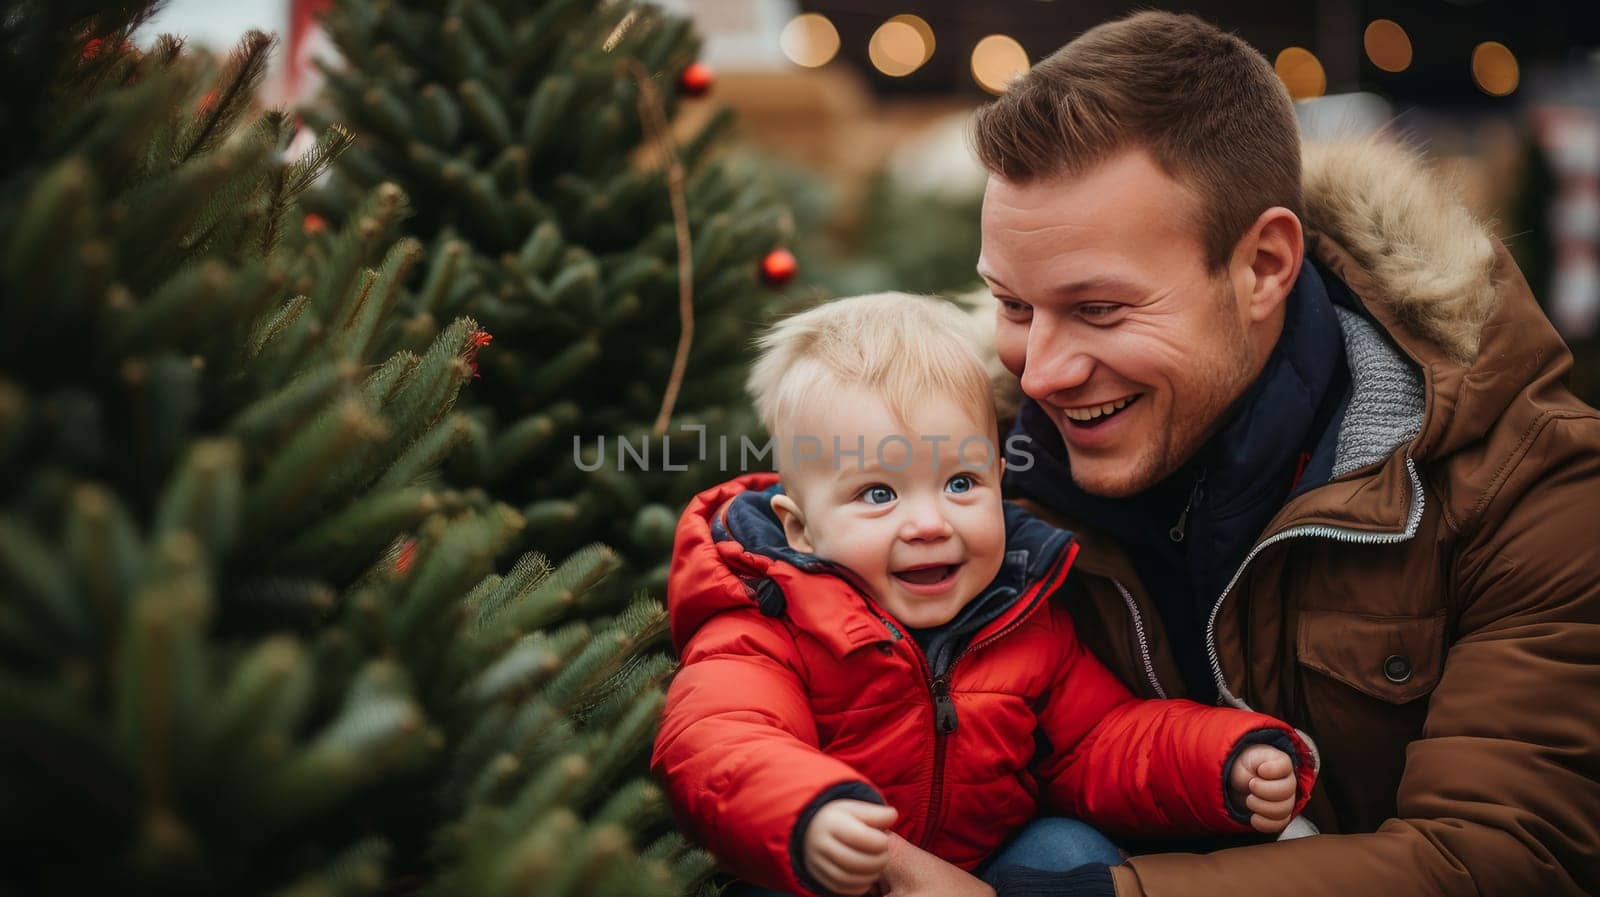 A happy family with a child and parents chooses a New Year's tree at the Christmas tree market. Merry Christmas and Merry New Year concept. by Alla_Yurtayeva